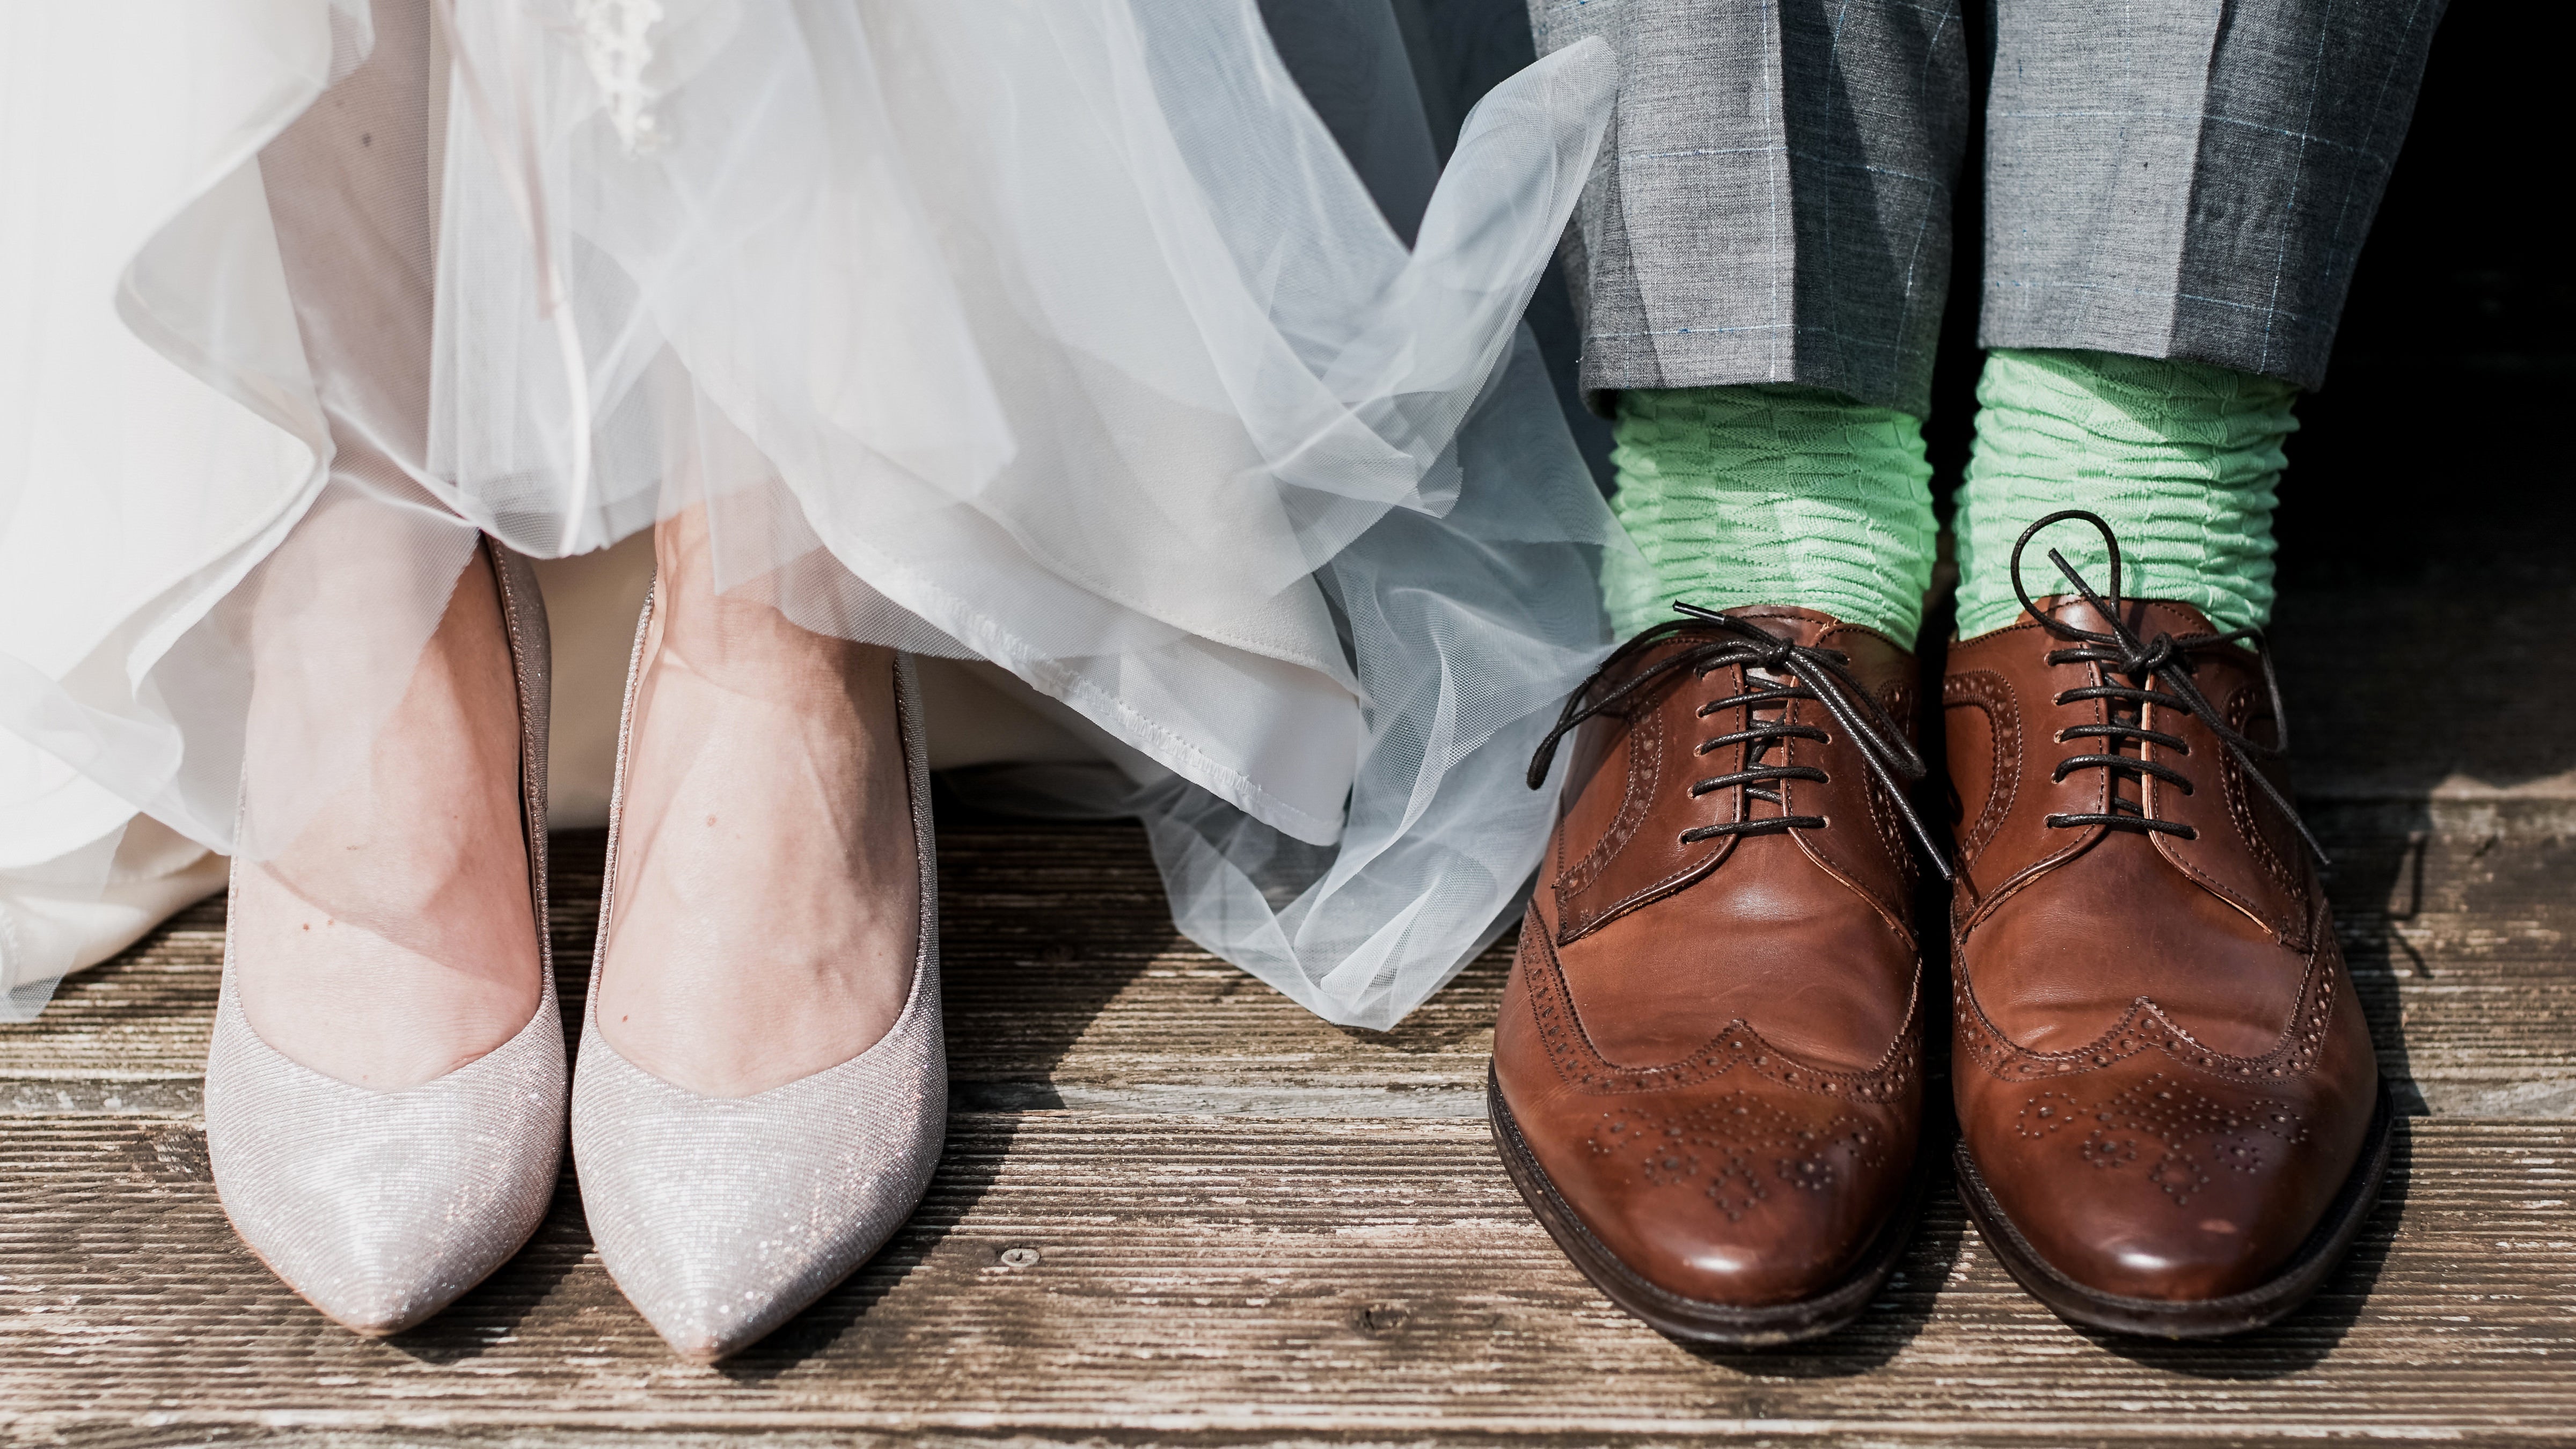 Woman sparkly wedding shoes next to mens brown dress shoes on a wood floor